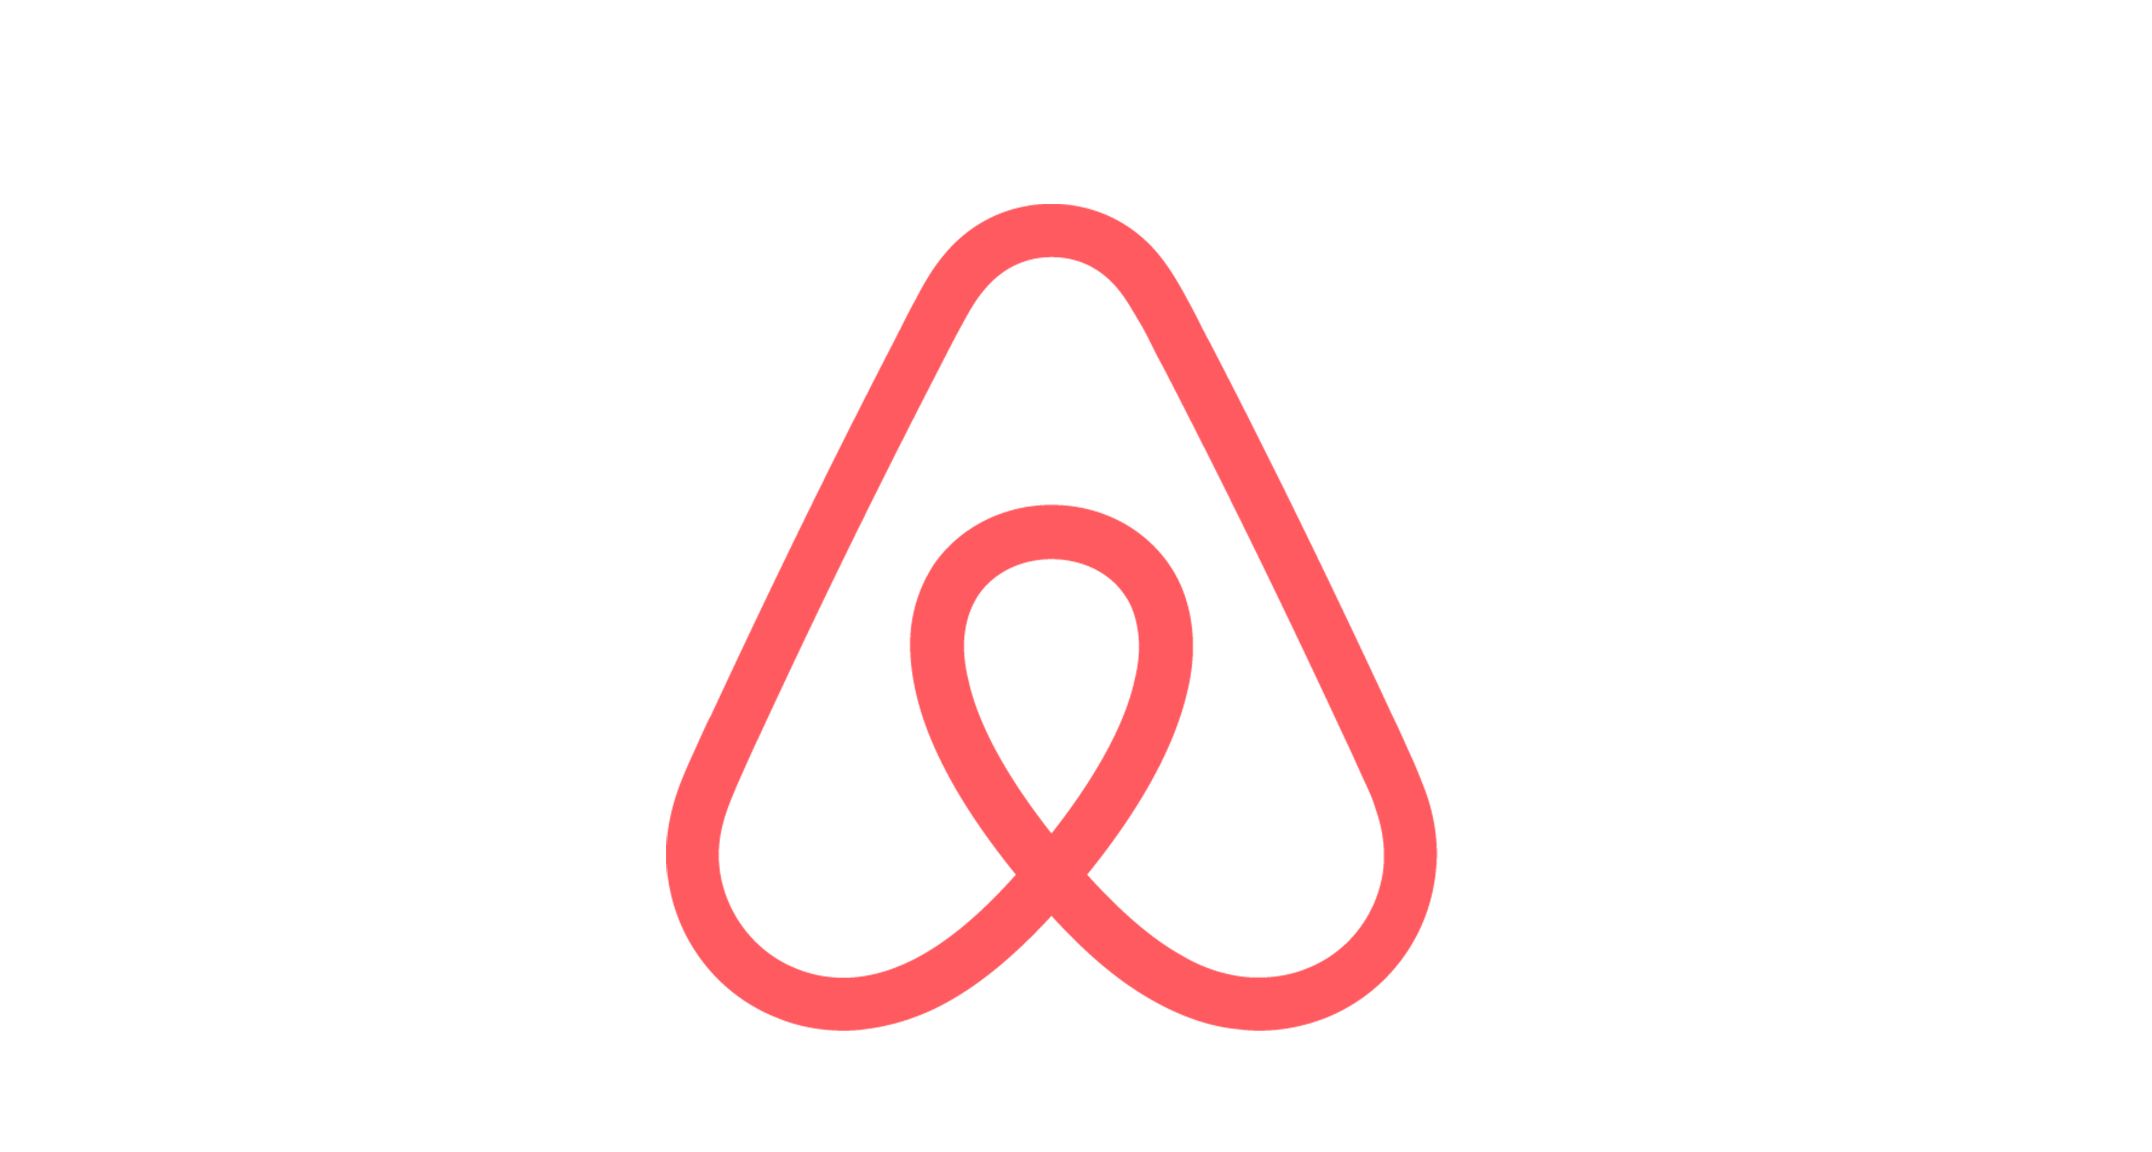  Receive Your SIM or WiFi Router at your AirBnb! 